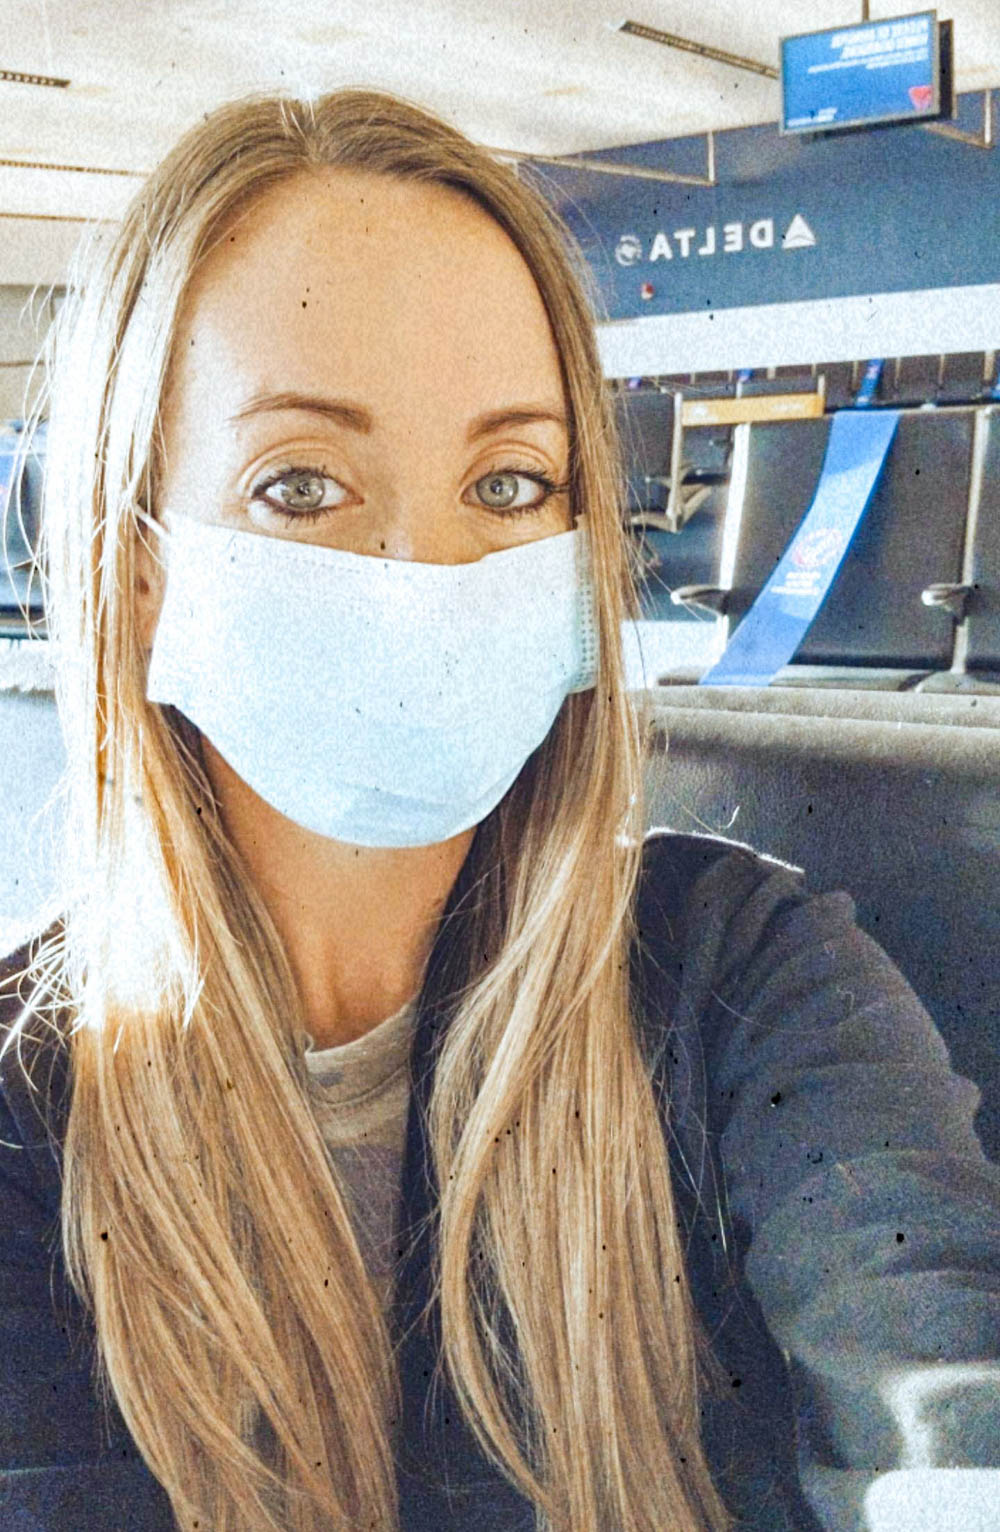 Blonde woman in a mask at the airport traveling during the pandemic